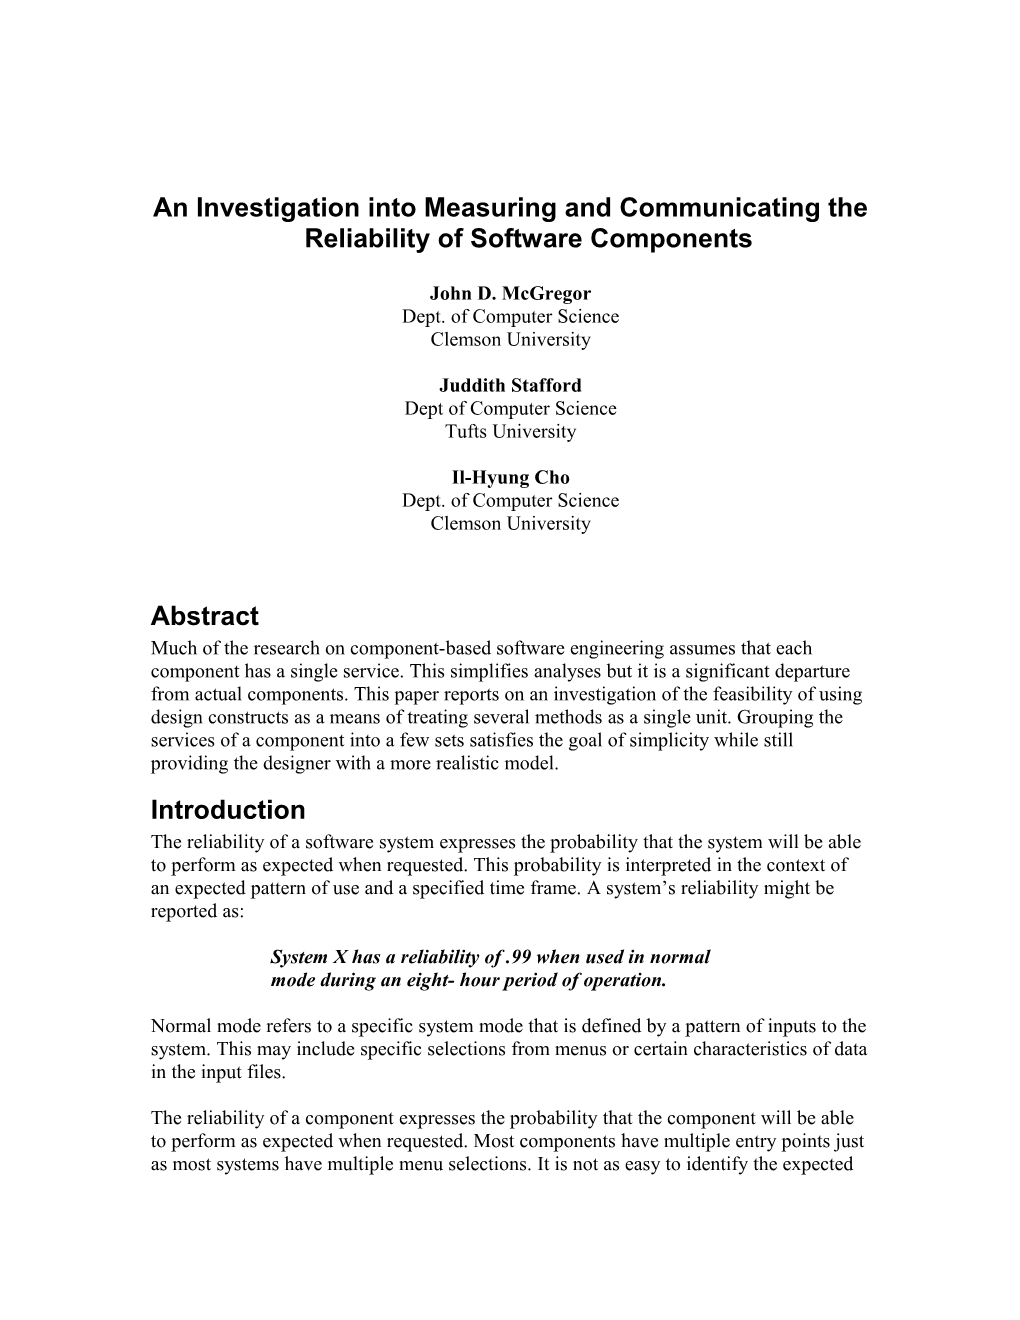 An Investigation Into Measuring and Communicating the Reliability of Software Components